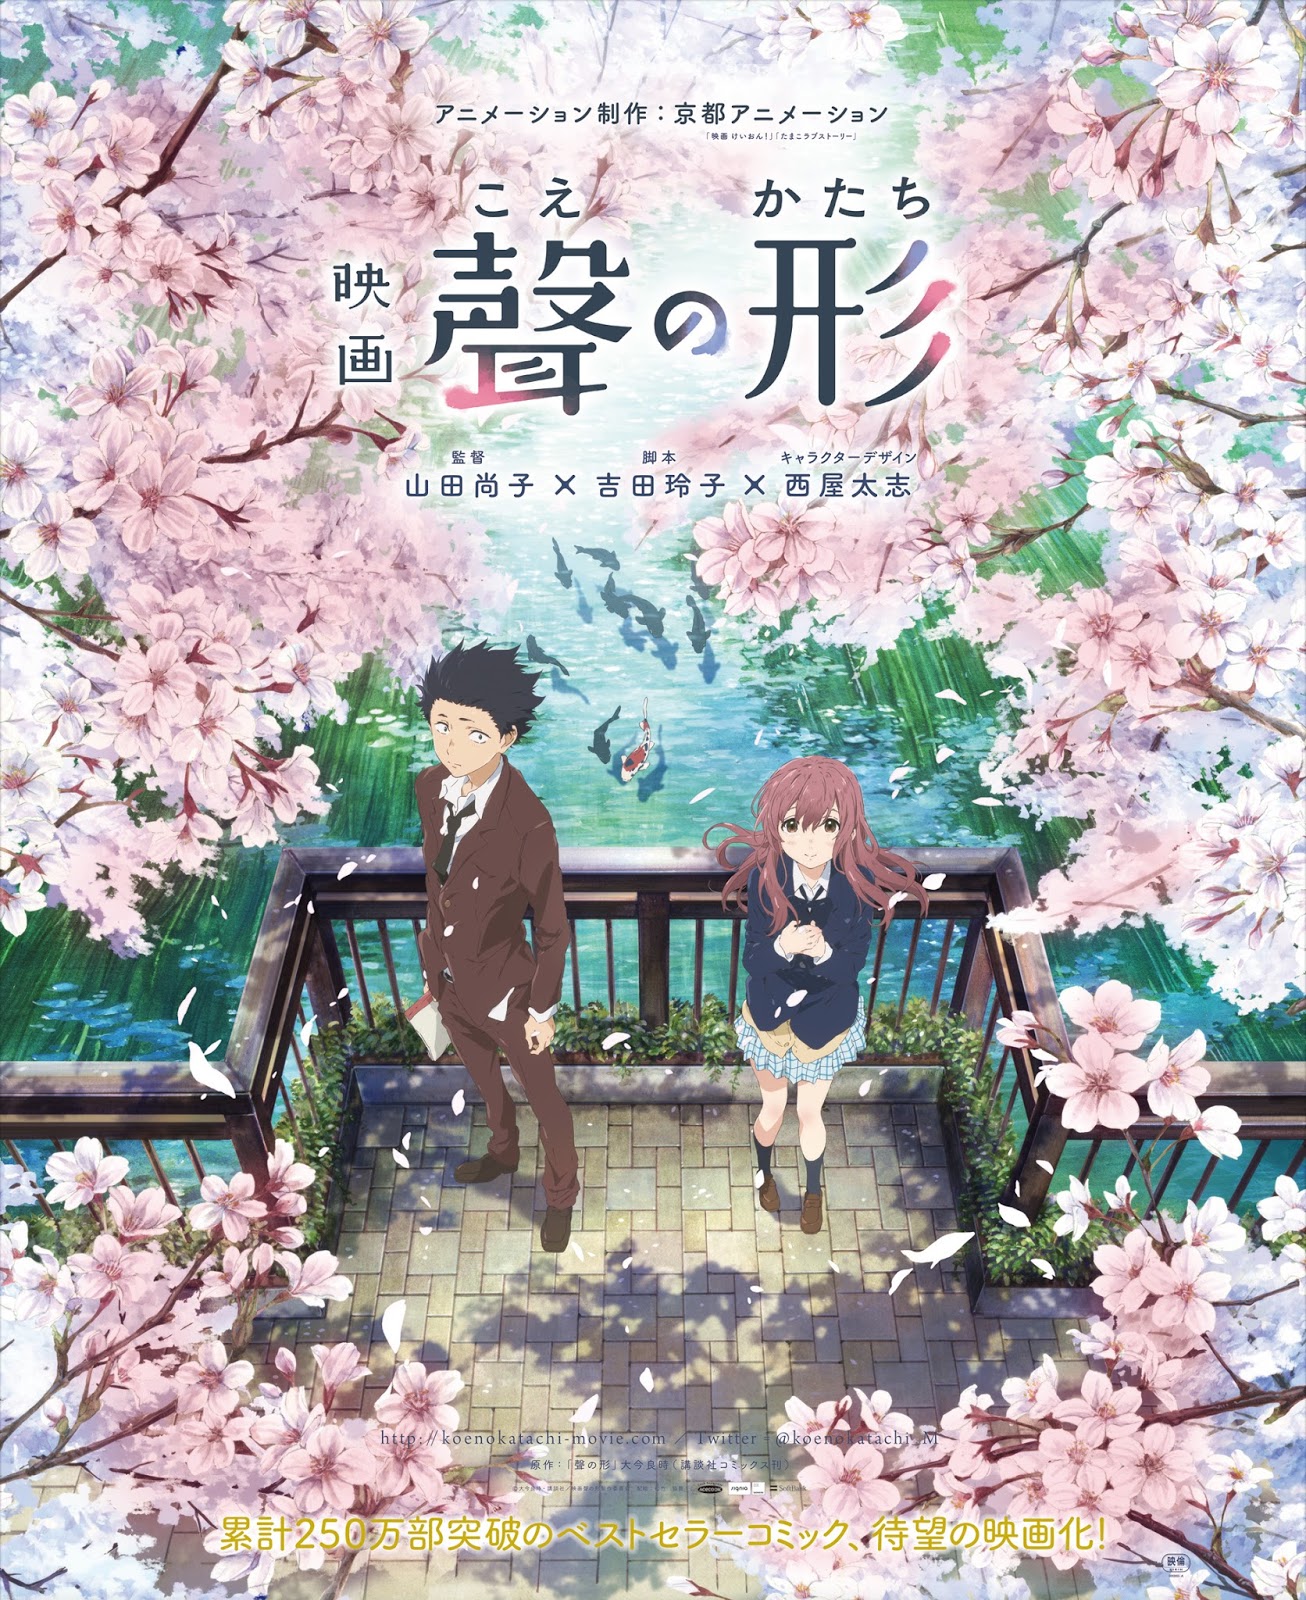 Movies: Acclaimed Manga And Box-Office Hit "A Silent Voice" Chron...